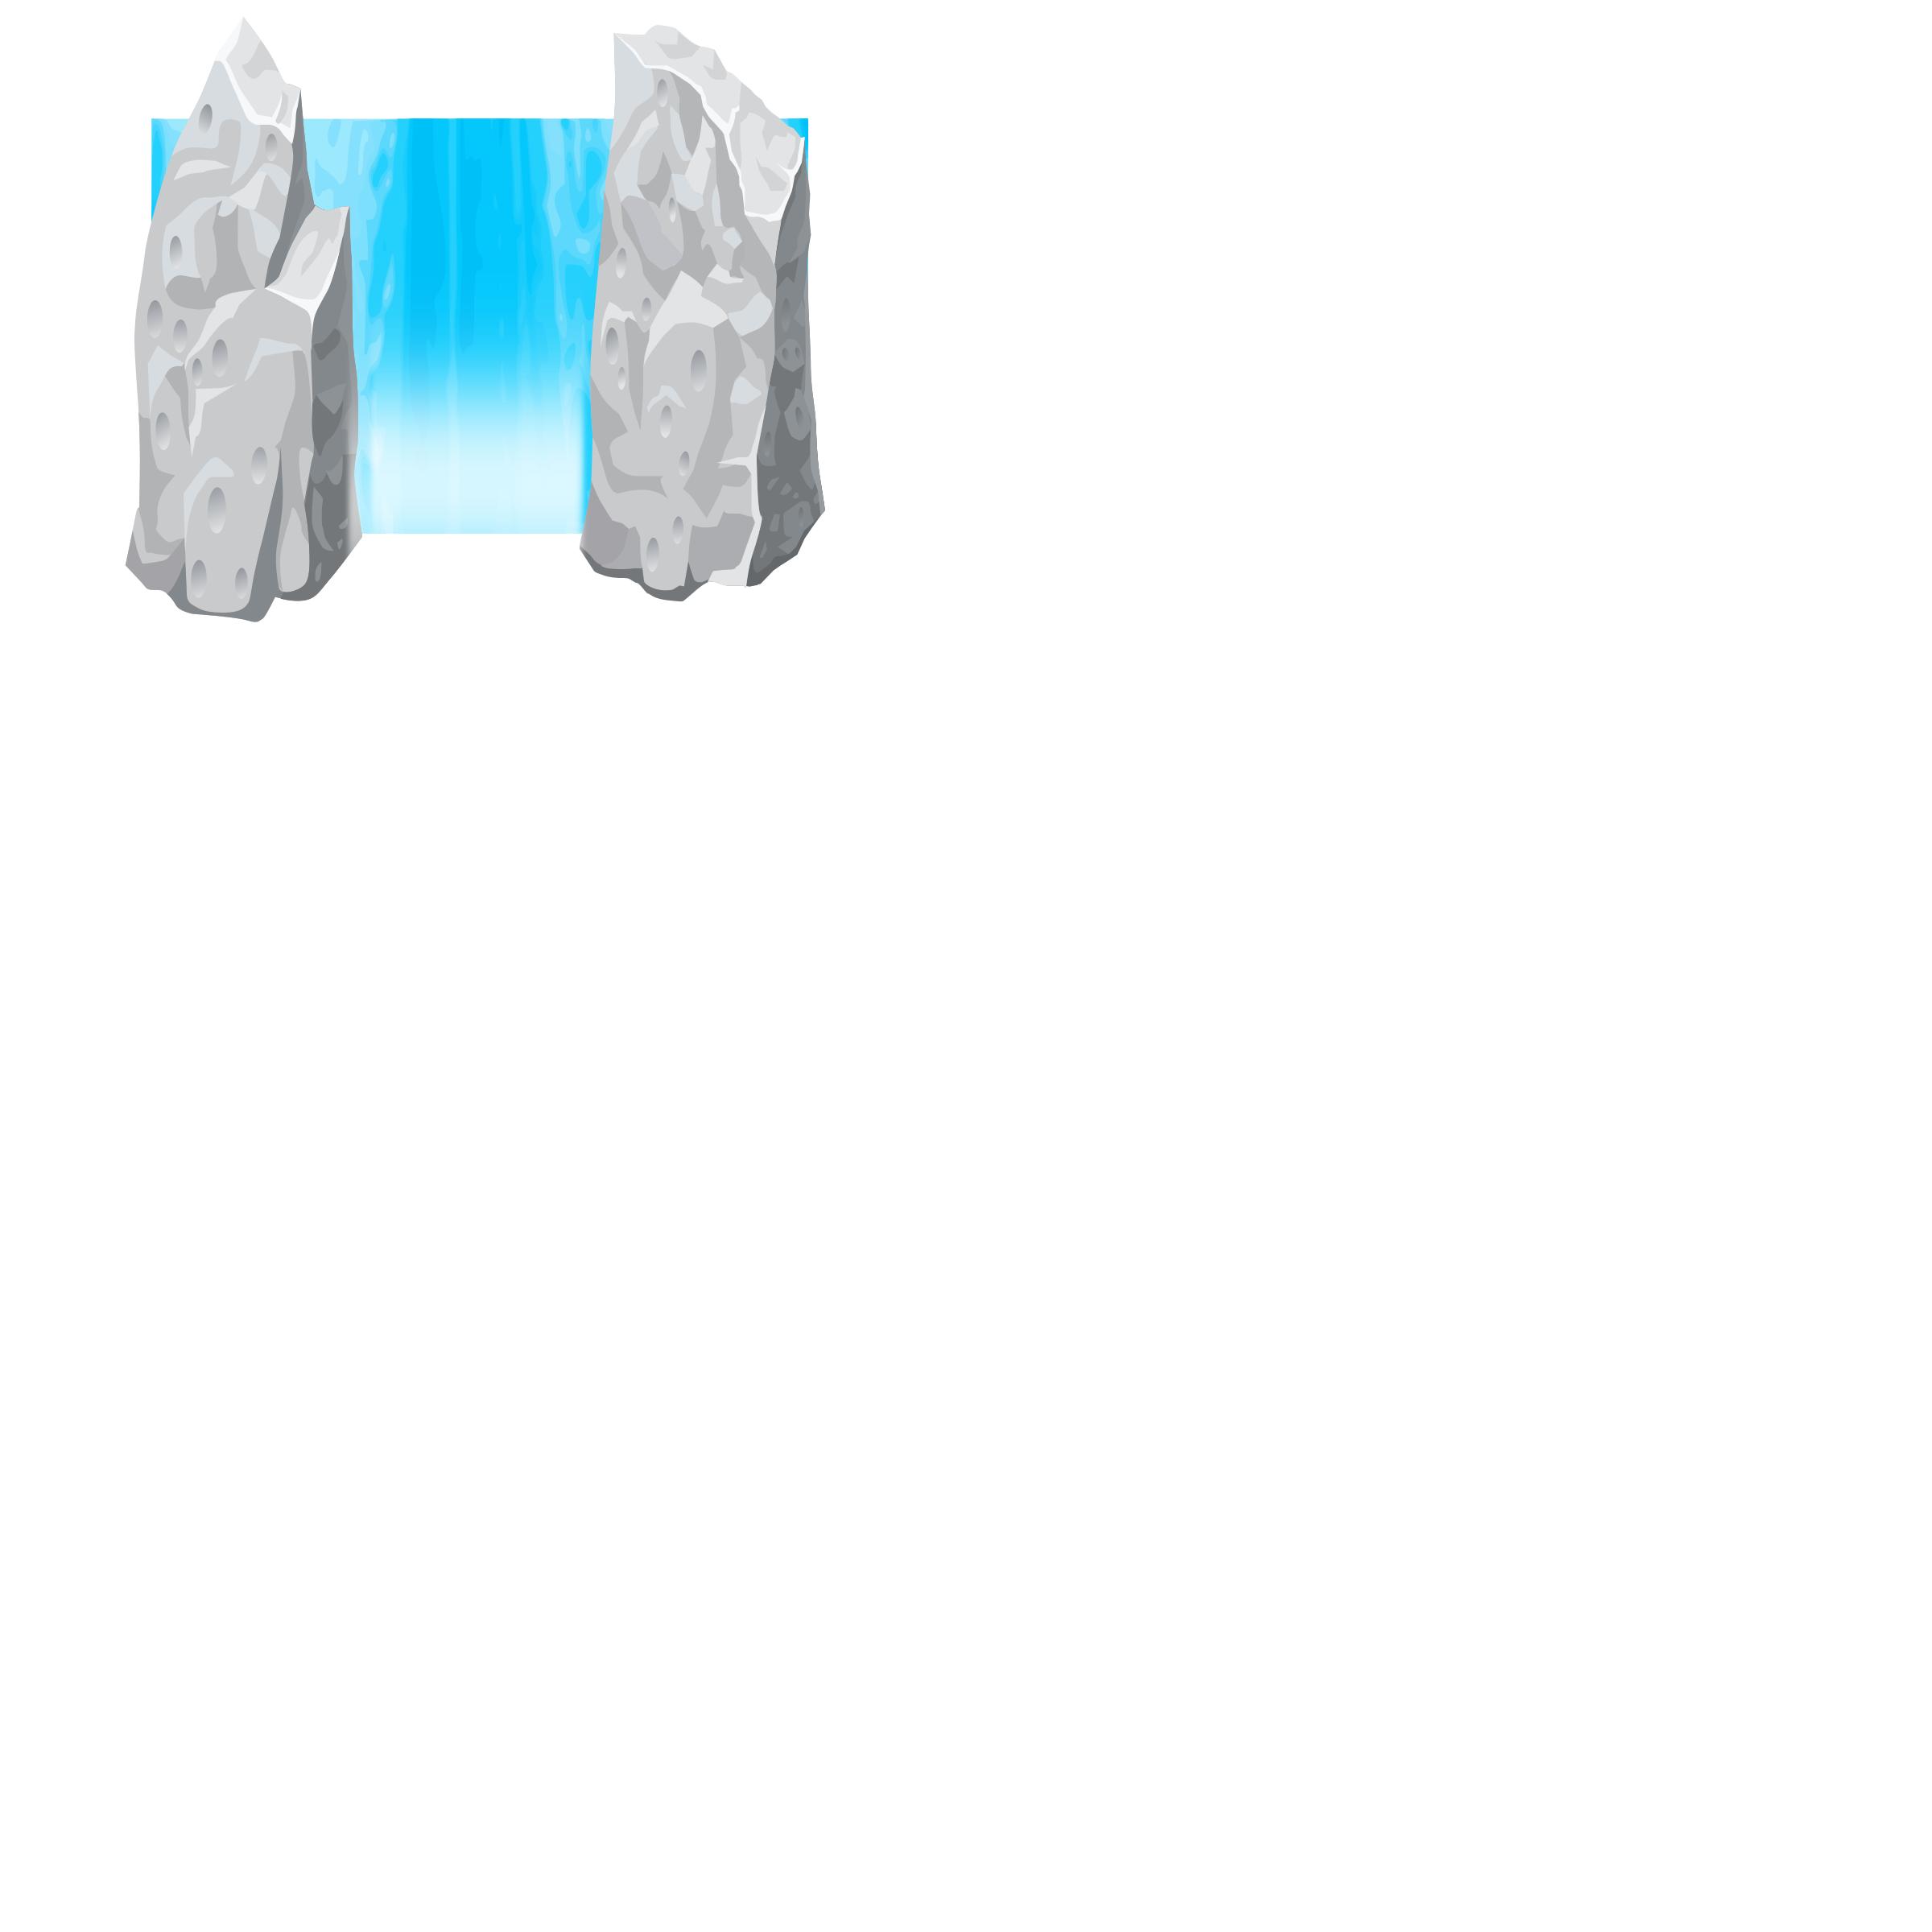 Waterfall-animation png